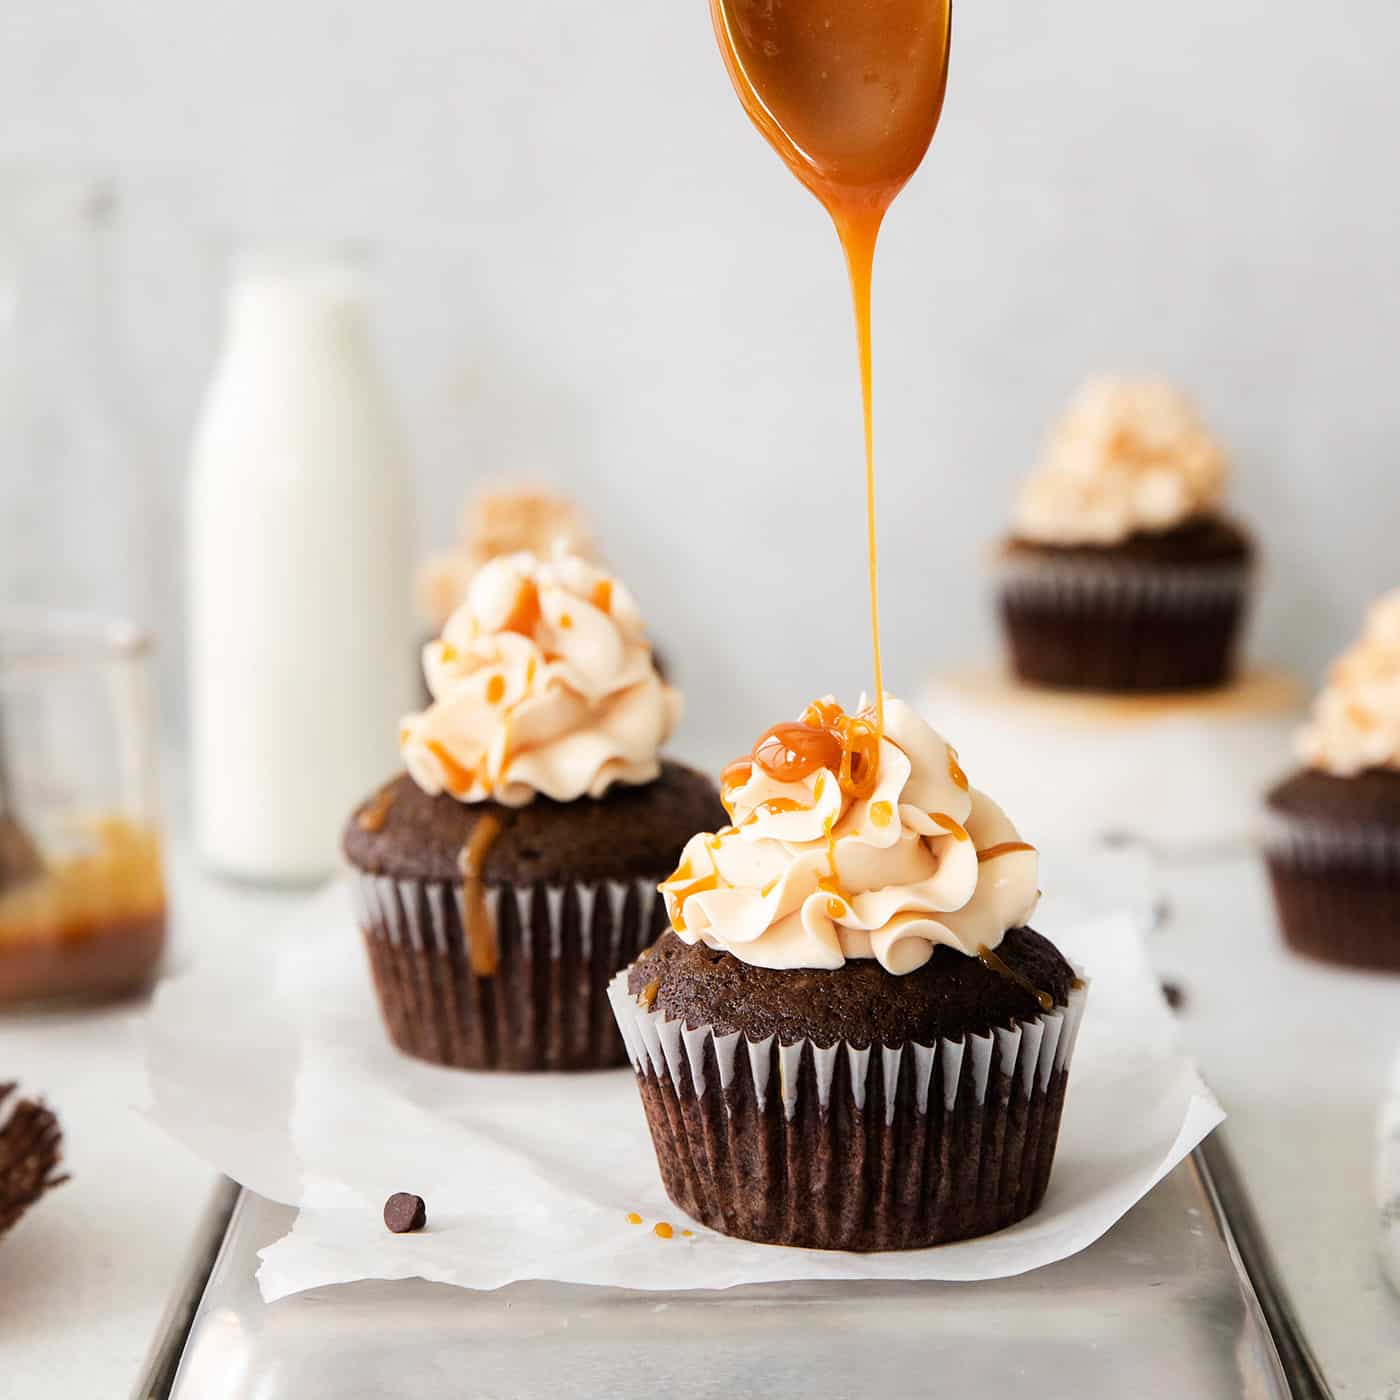 Caramel being drizzled on top of frosted chocolate cupcakes